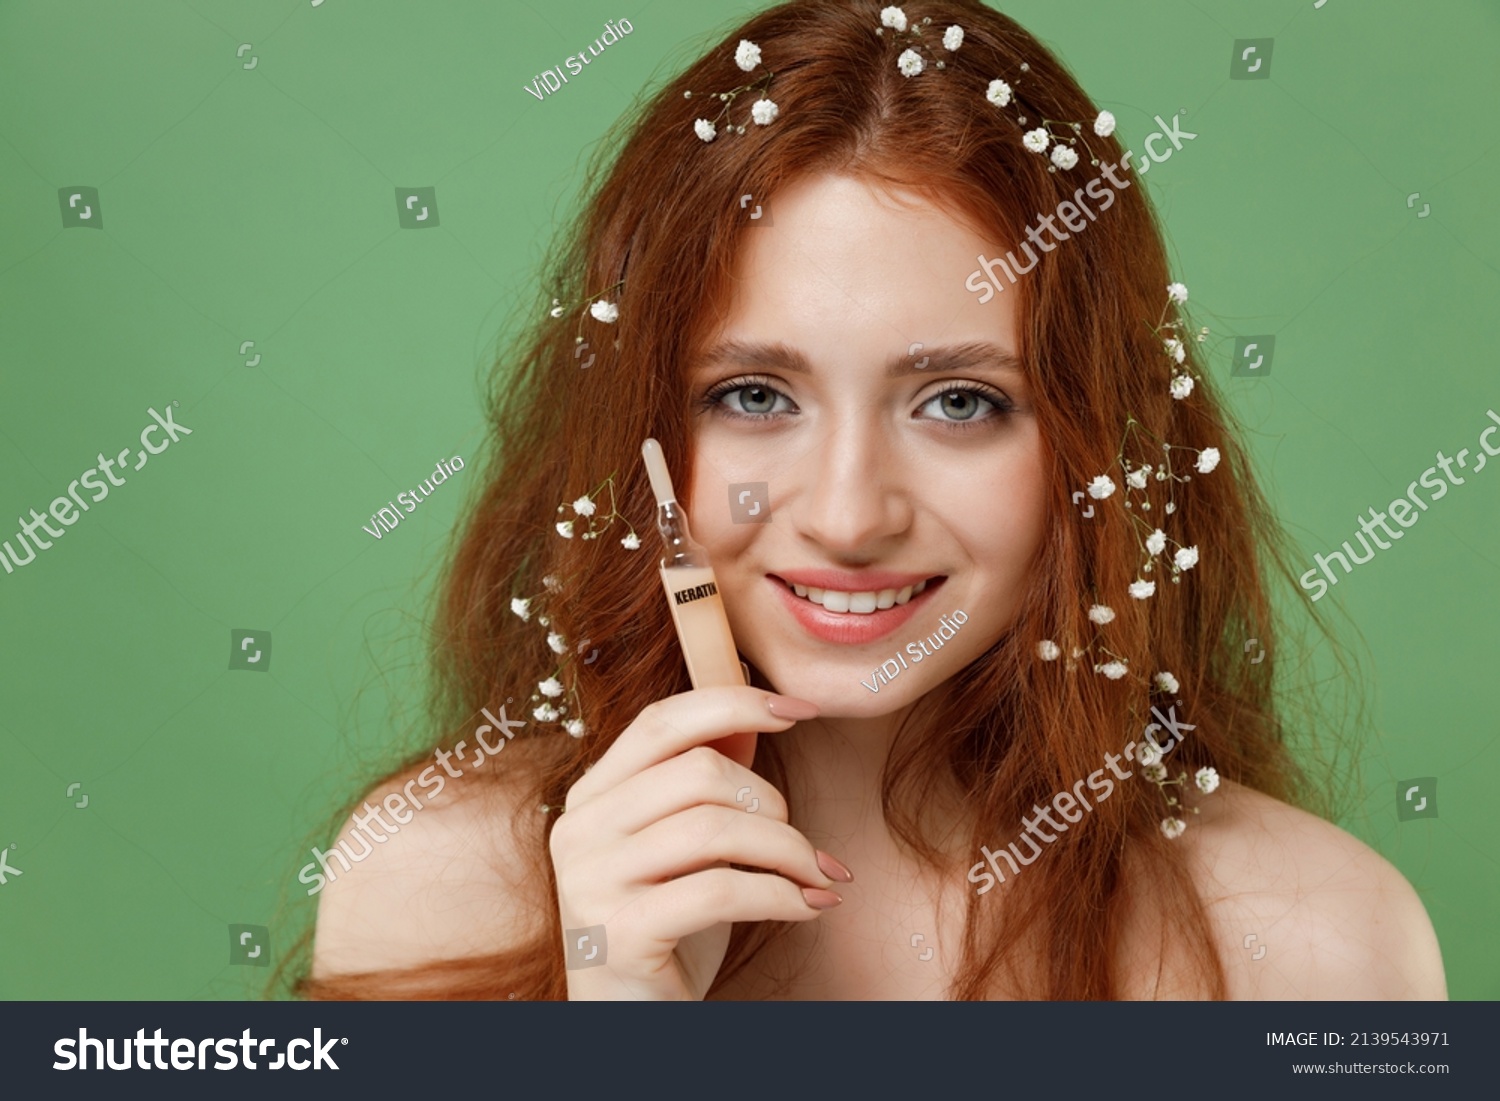 Beautiful Smiling Half Naked Topless Redhead Stock Photo Edit Now